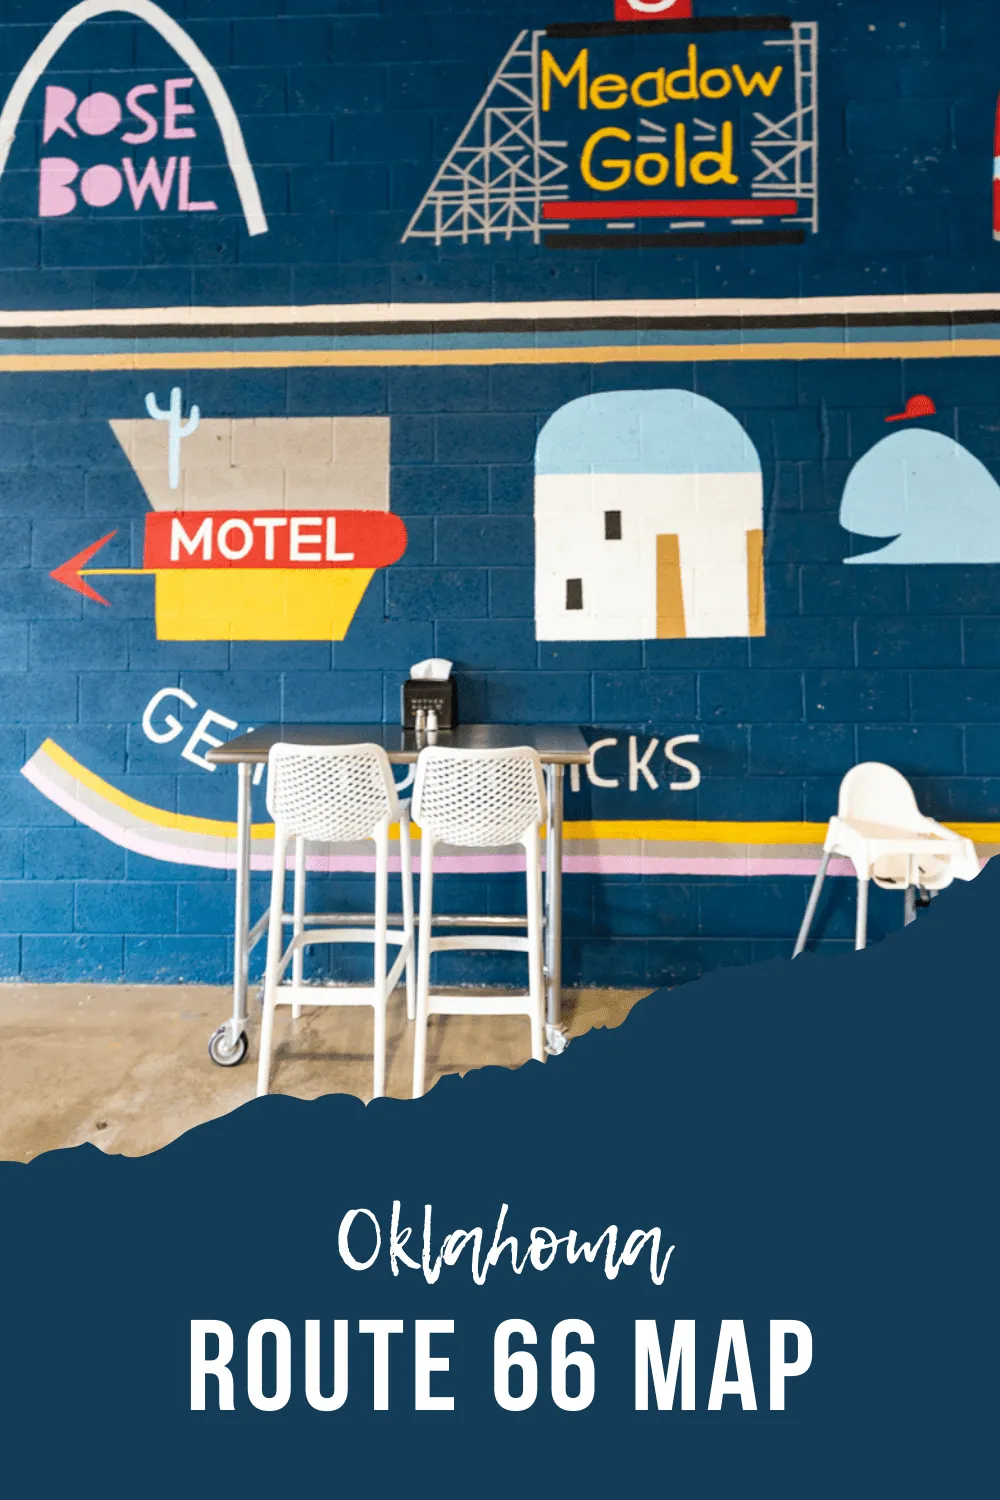 If you're planning a Route 66 road trip you need to know what to see and where to go. Our Oklahoma Route 66 map contains all the best stops in the state. We've mapped out all the biggest and best roadside attractions, visitor centers, museums, restaurants, diners, fast food, vintage motels, and other iconic stops on this Route 66 Oklahoma map. #Route66 #Oklahoma #Route66RoadTrip #OklahomaRoute66 #OklahomaRoute66RoadTrip #OklahomaRoadTrip #travel #RoadTrip